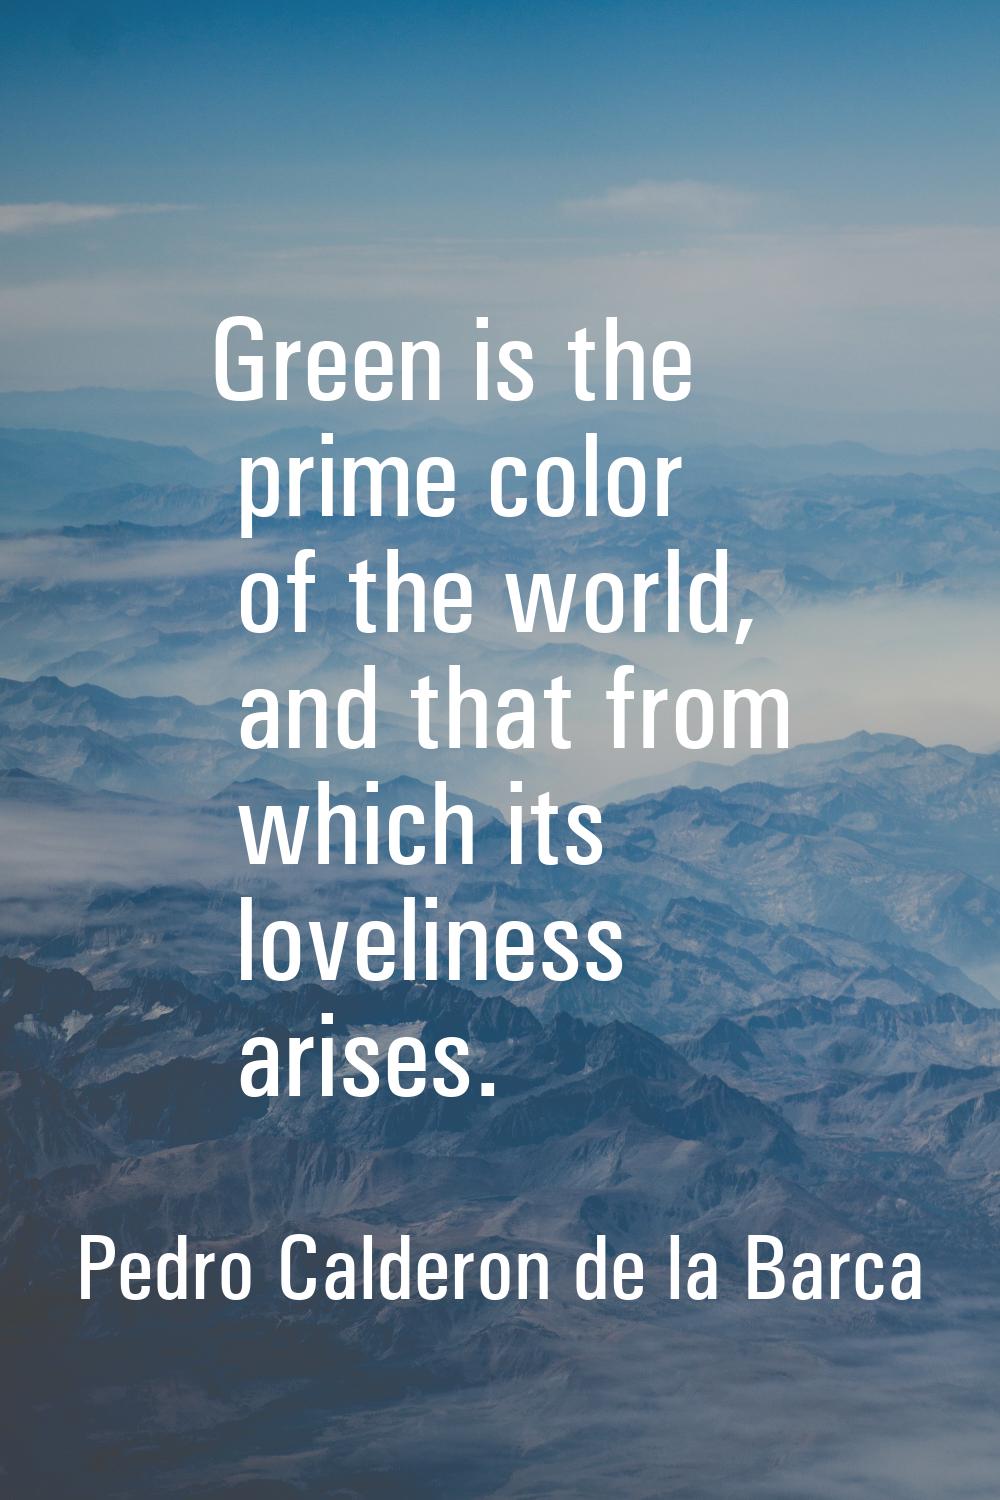 Green is the prime color of the world, and that from which its loveliness arises.